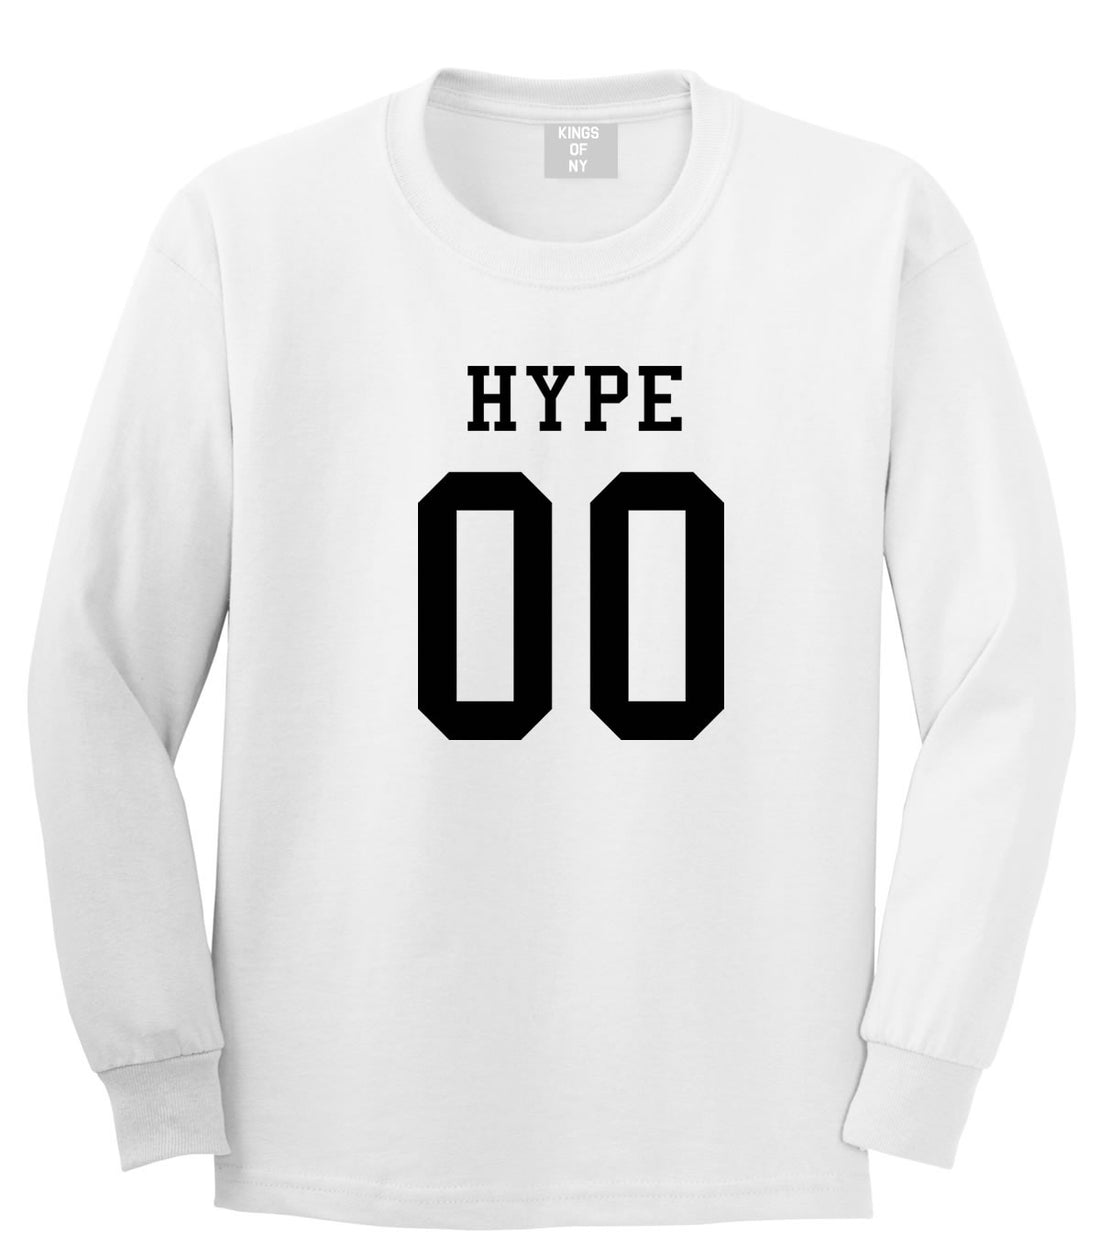 Hype Team Jersey Long Sleeve T-Shirt in White By Kings Of NY